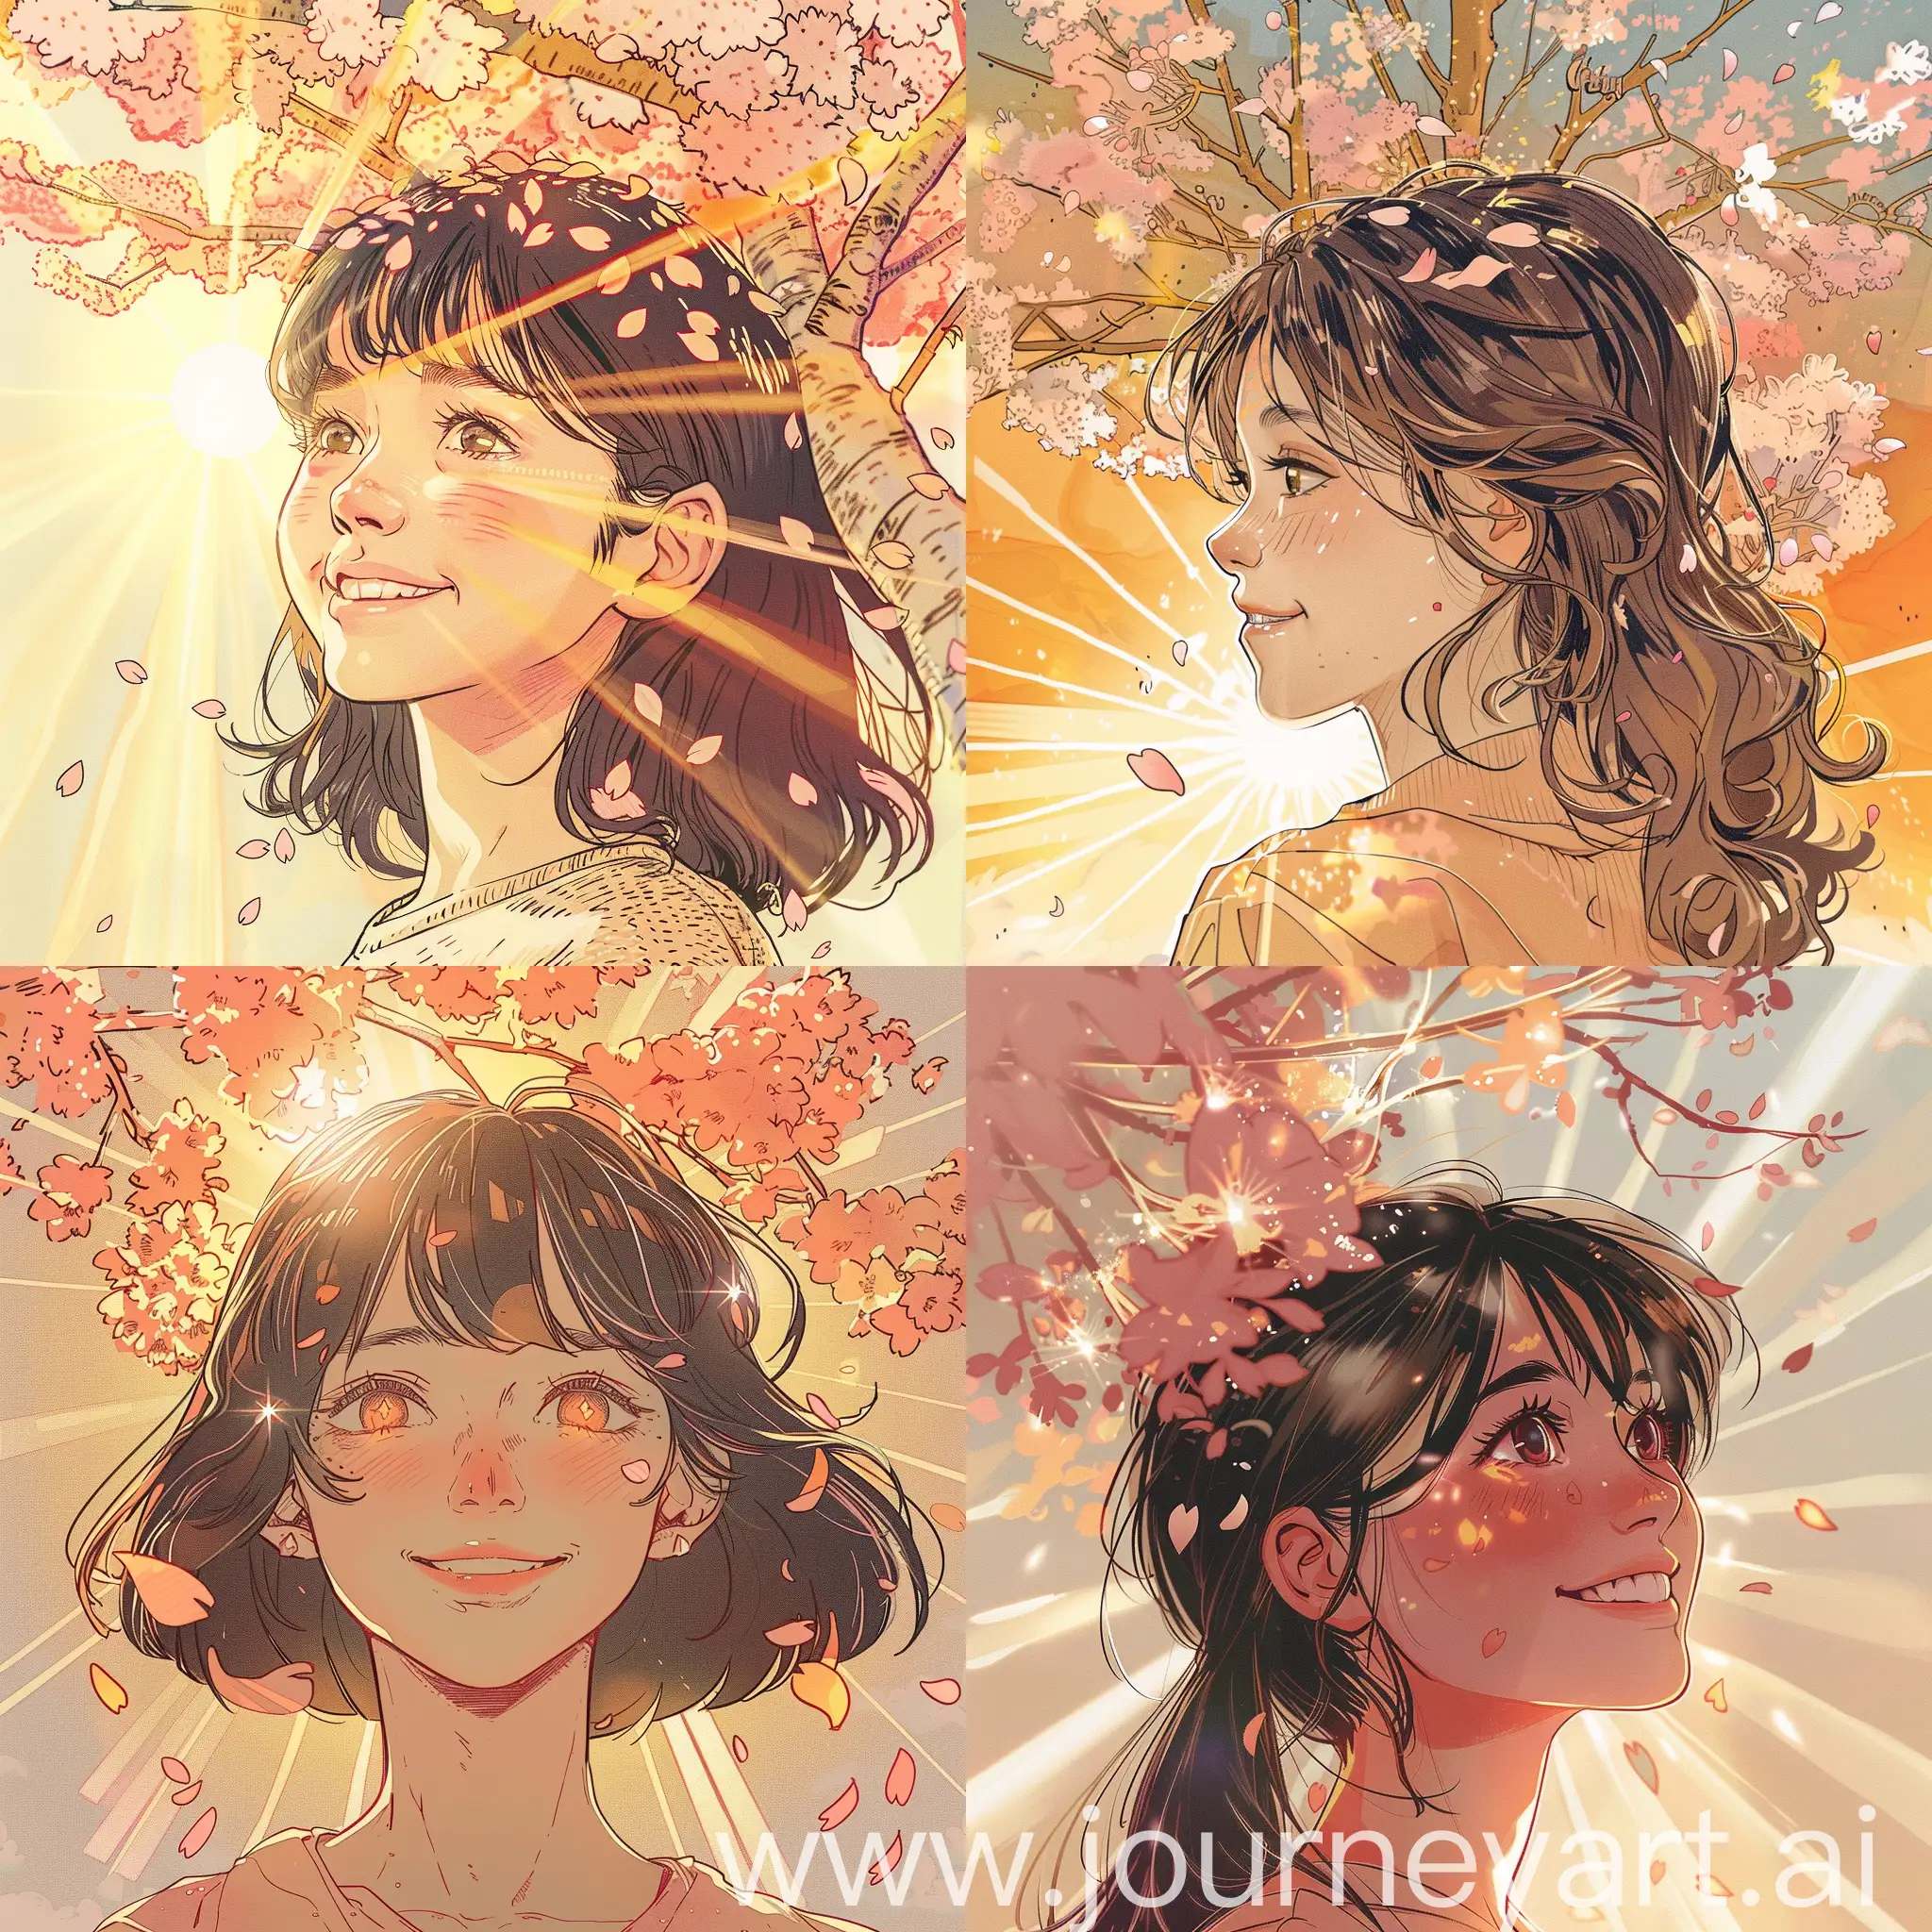 Radiant-Teenage-Girl-Smiling-Amidst-Sakura-Blossoms-in-Warm-Anime-Style